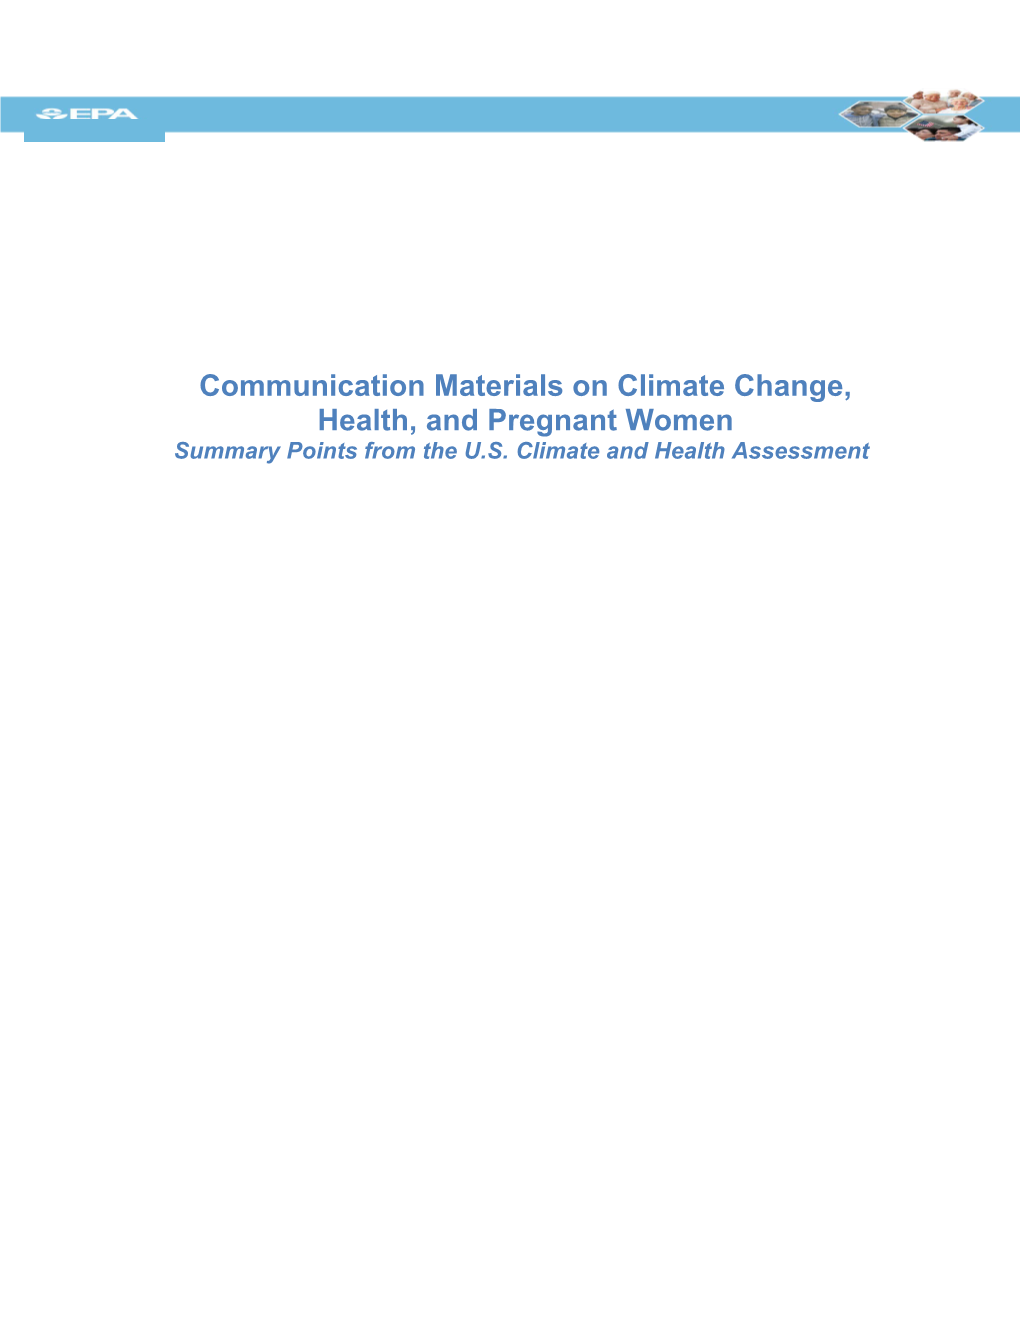 Communication Materials on Climate Change, Health, and Pregnant Women